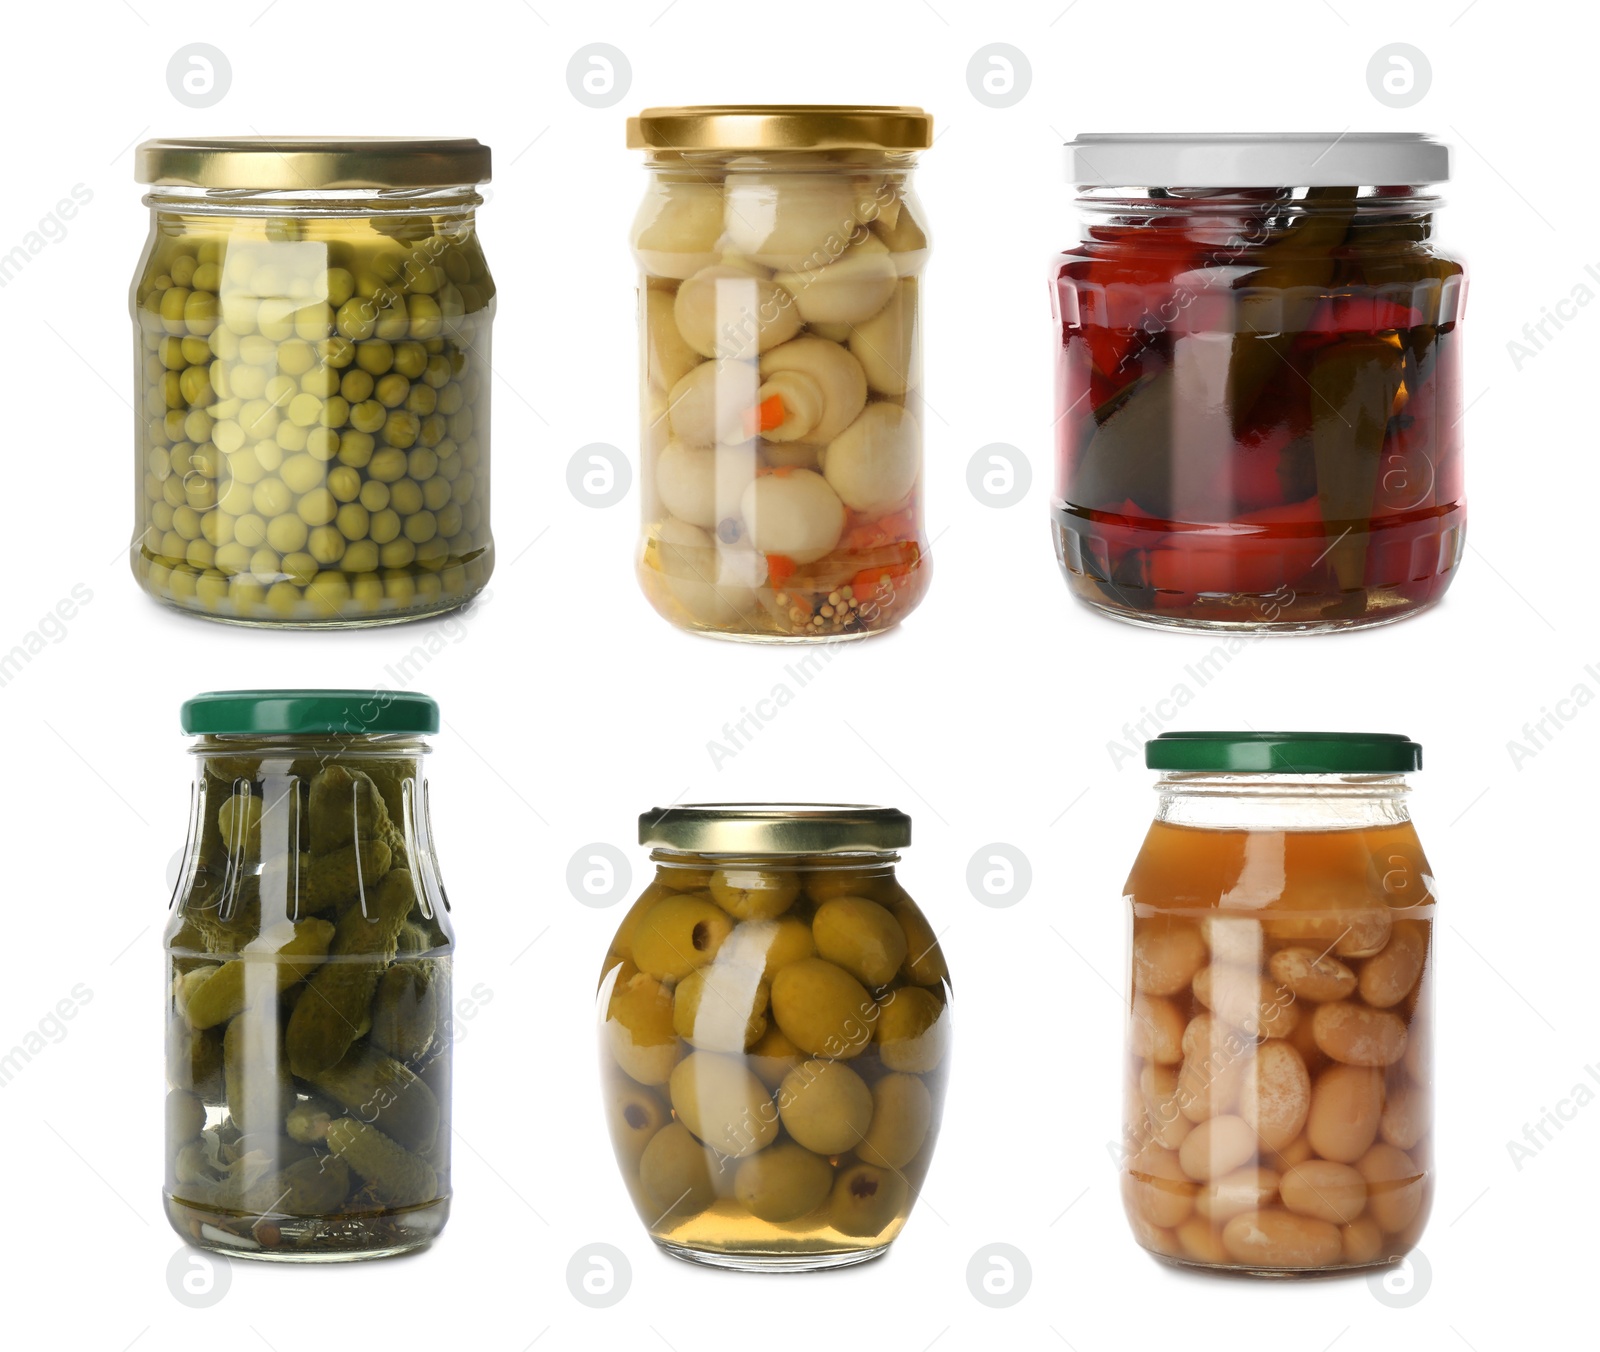 Image of Set of jars with pickled foods on white background